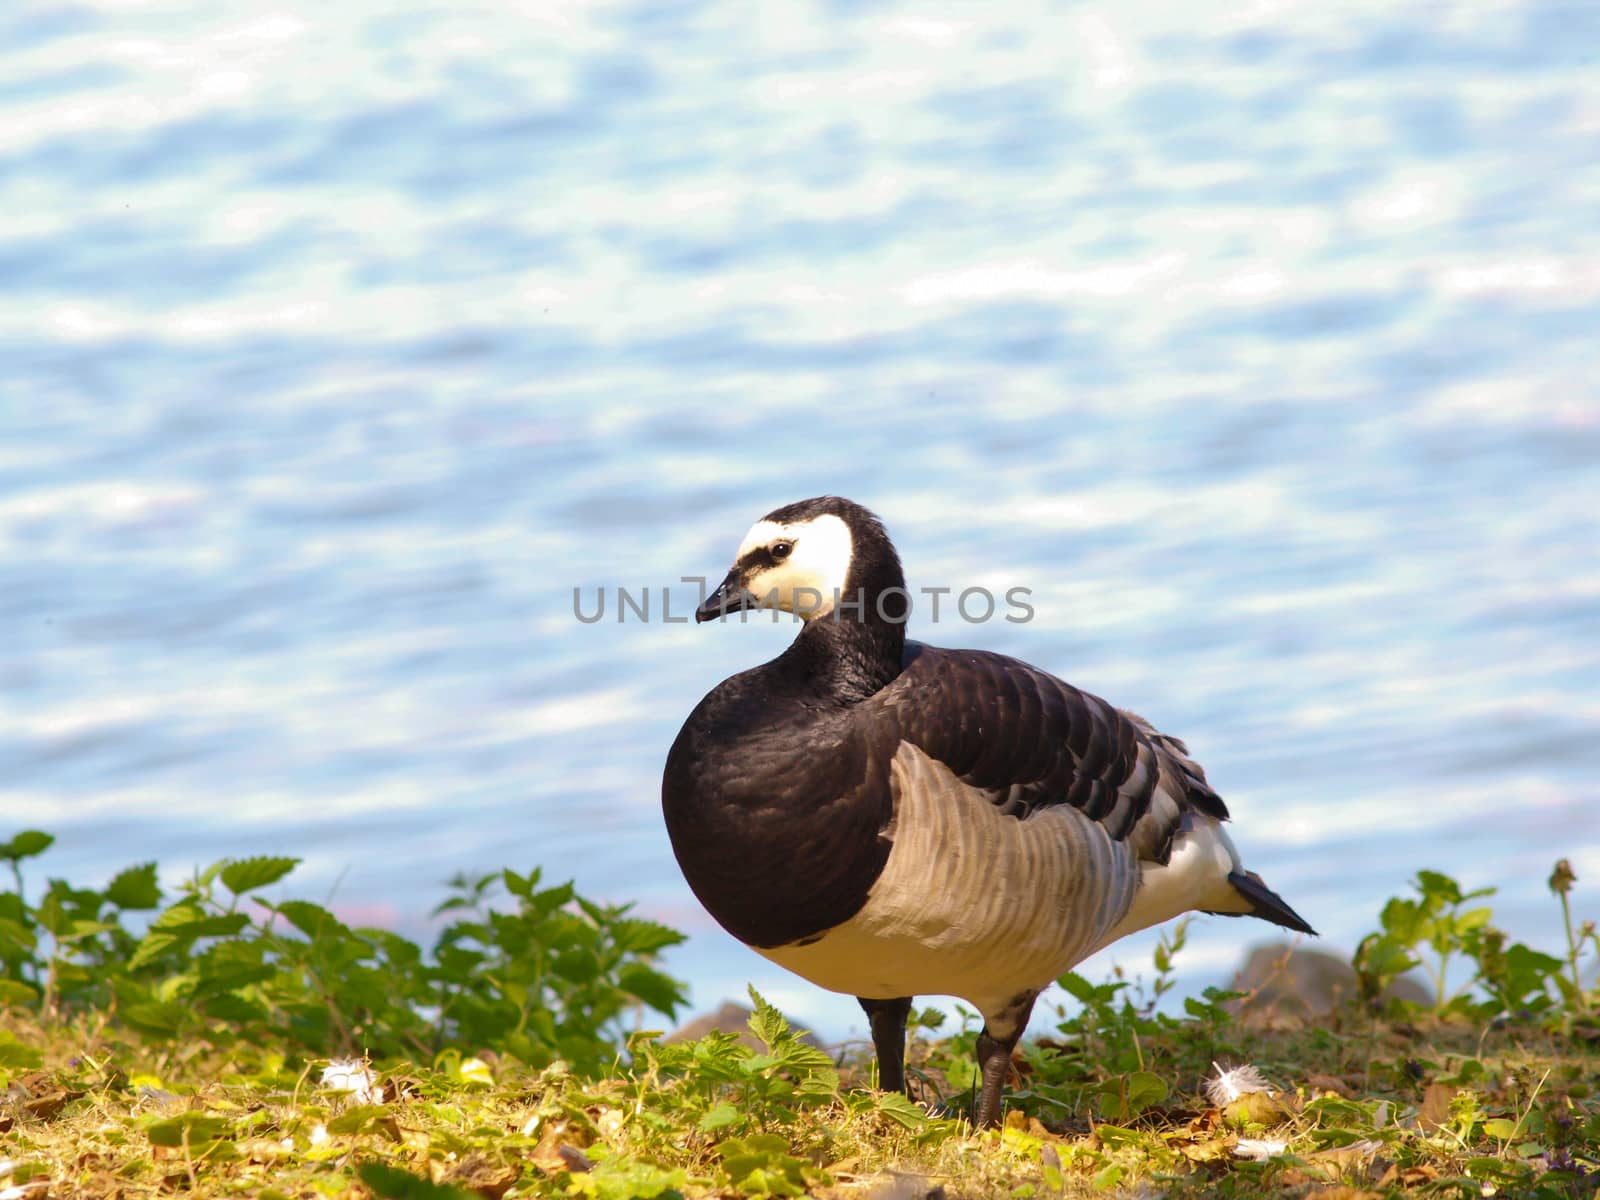 Single barnacle goose, standing in fresh green grass in front of shimmering blue sea